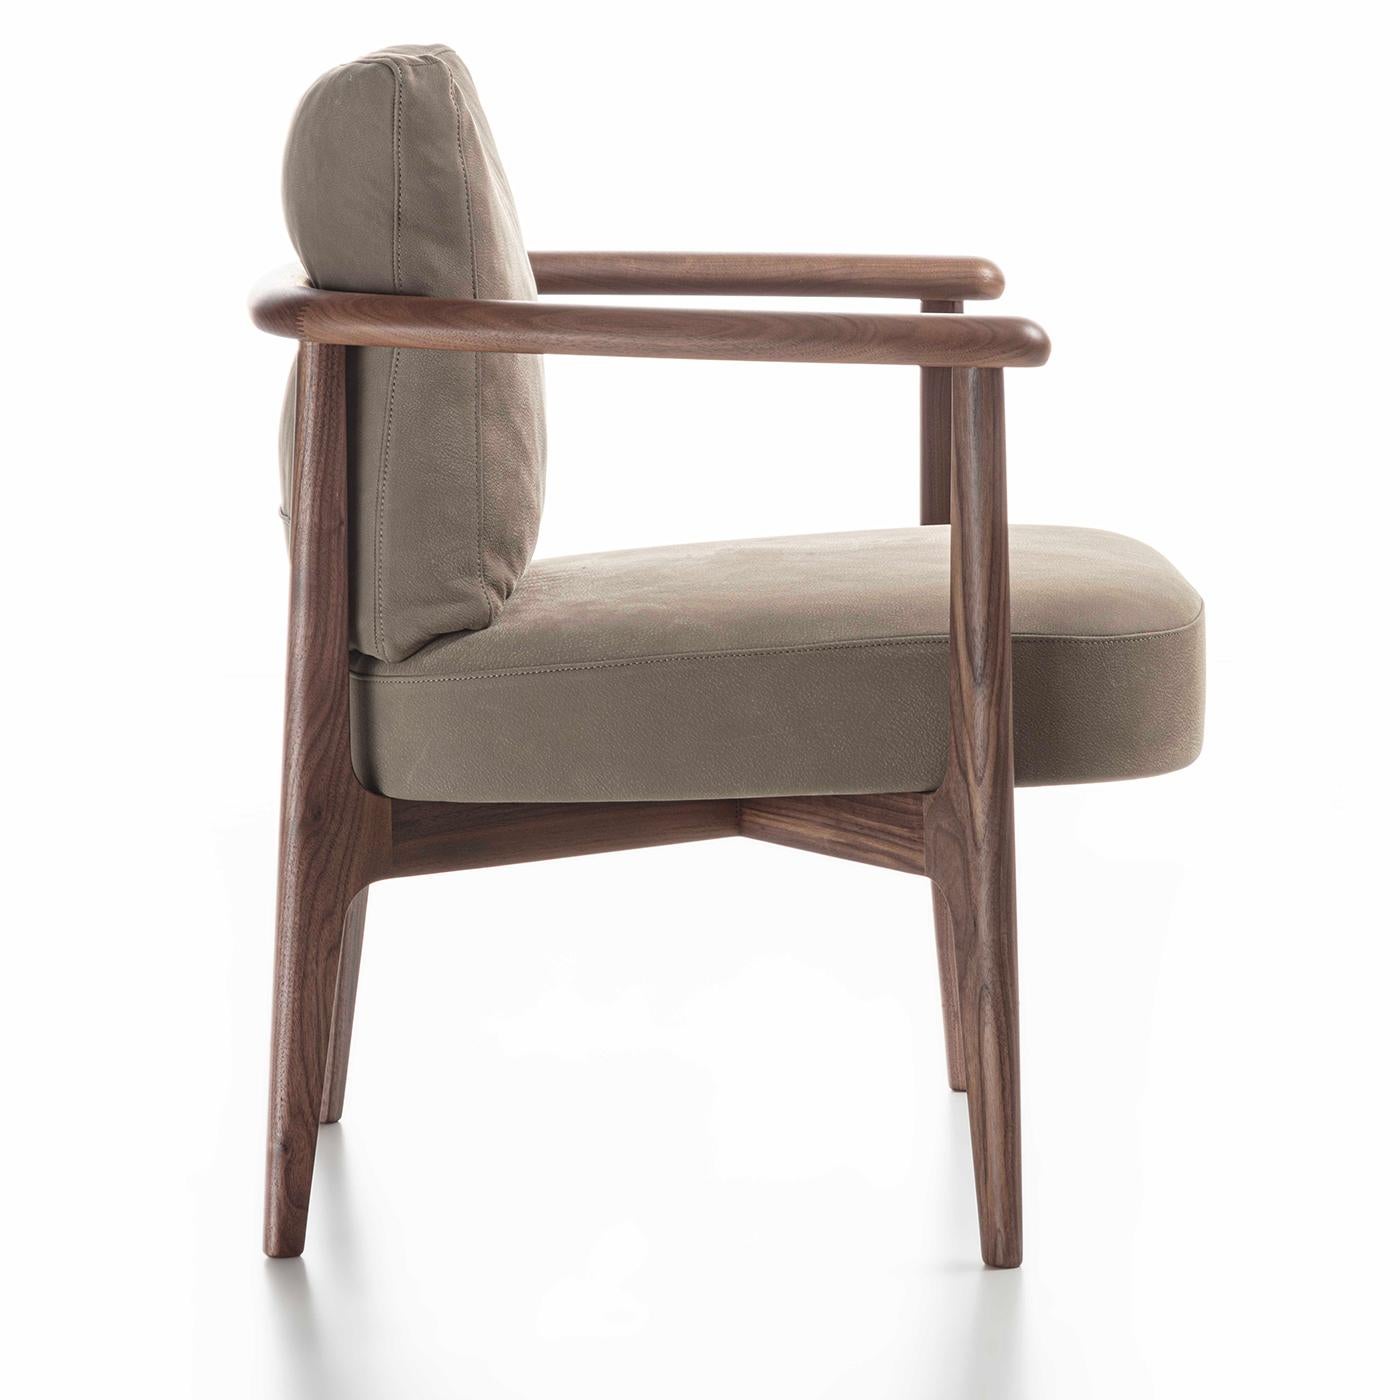 This stunning armchair in solid Canaletto walnut exemplifies modern sophistication with its harmonious curves and timeless neutral tones. The 45cm-high seat and backrest - embraced by a fully-enveloping back that flows into the armrests (H 63cm) -